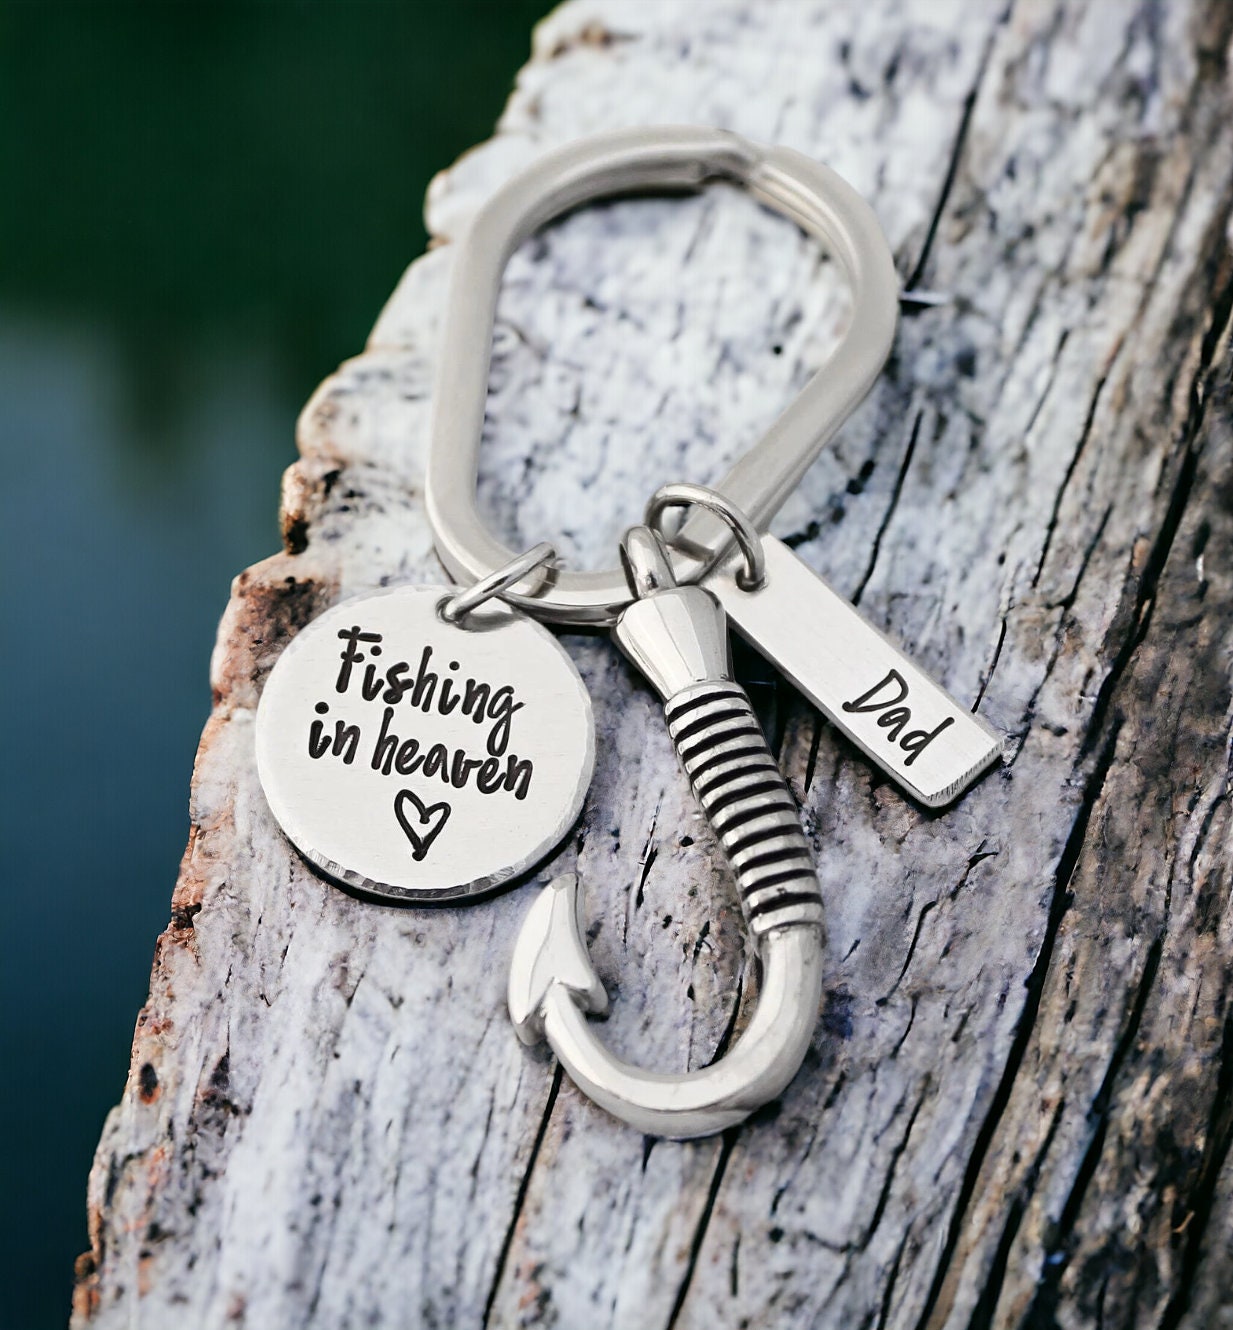 ImprintedDesigns Fishing in Heaven - Cremation Keychain - Urn Key Chain - Ashes Holder - Dad - Grandpa - Brother - Personalized Memorial Keychain -fisherman